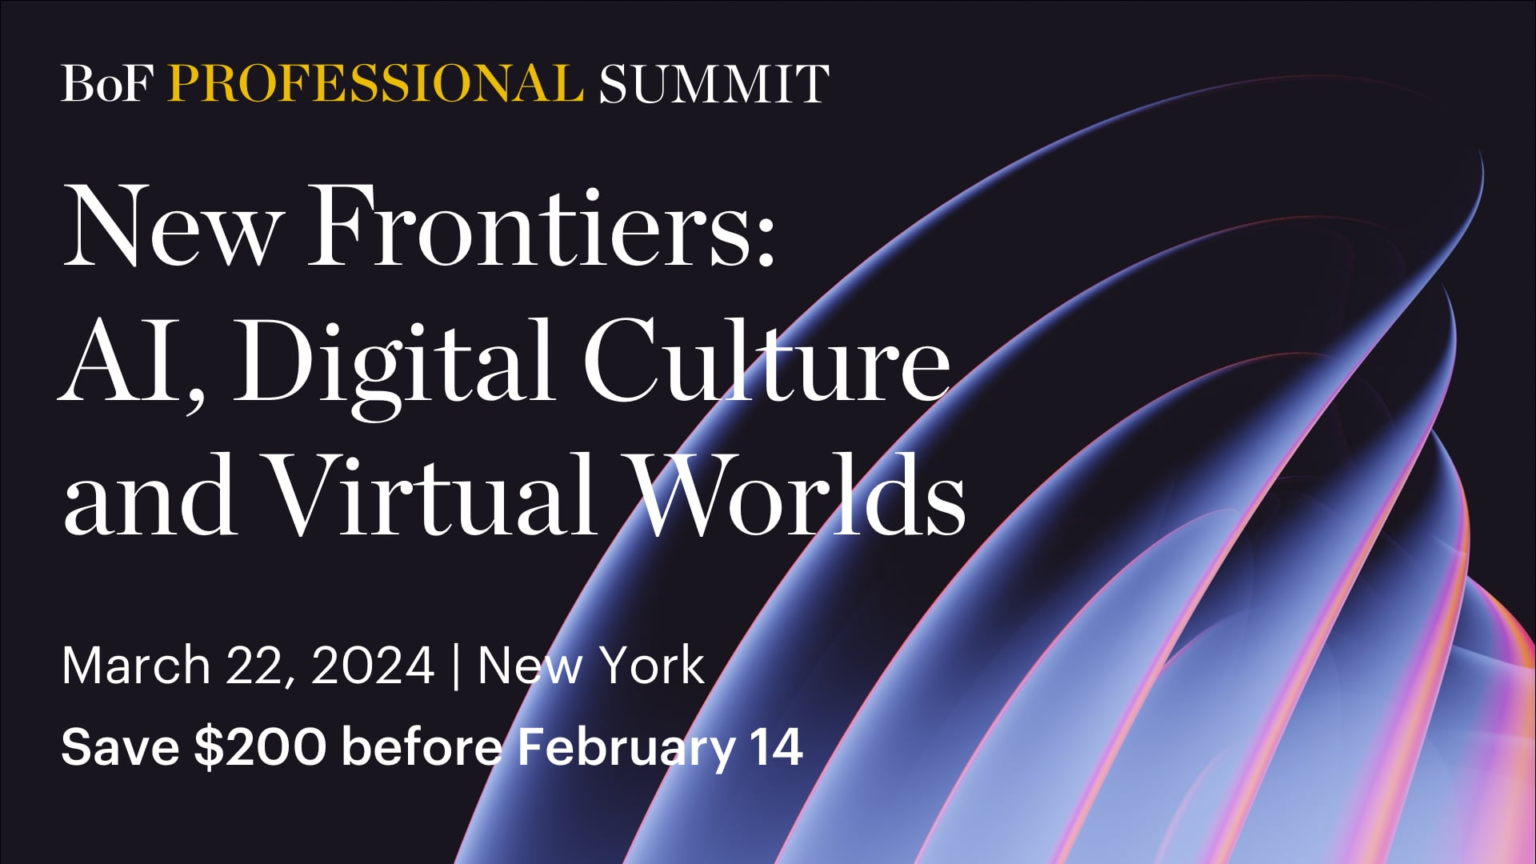 The BoF Professional Summit AI, Digital Culture and Virtual Worlds